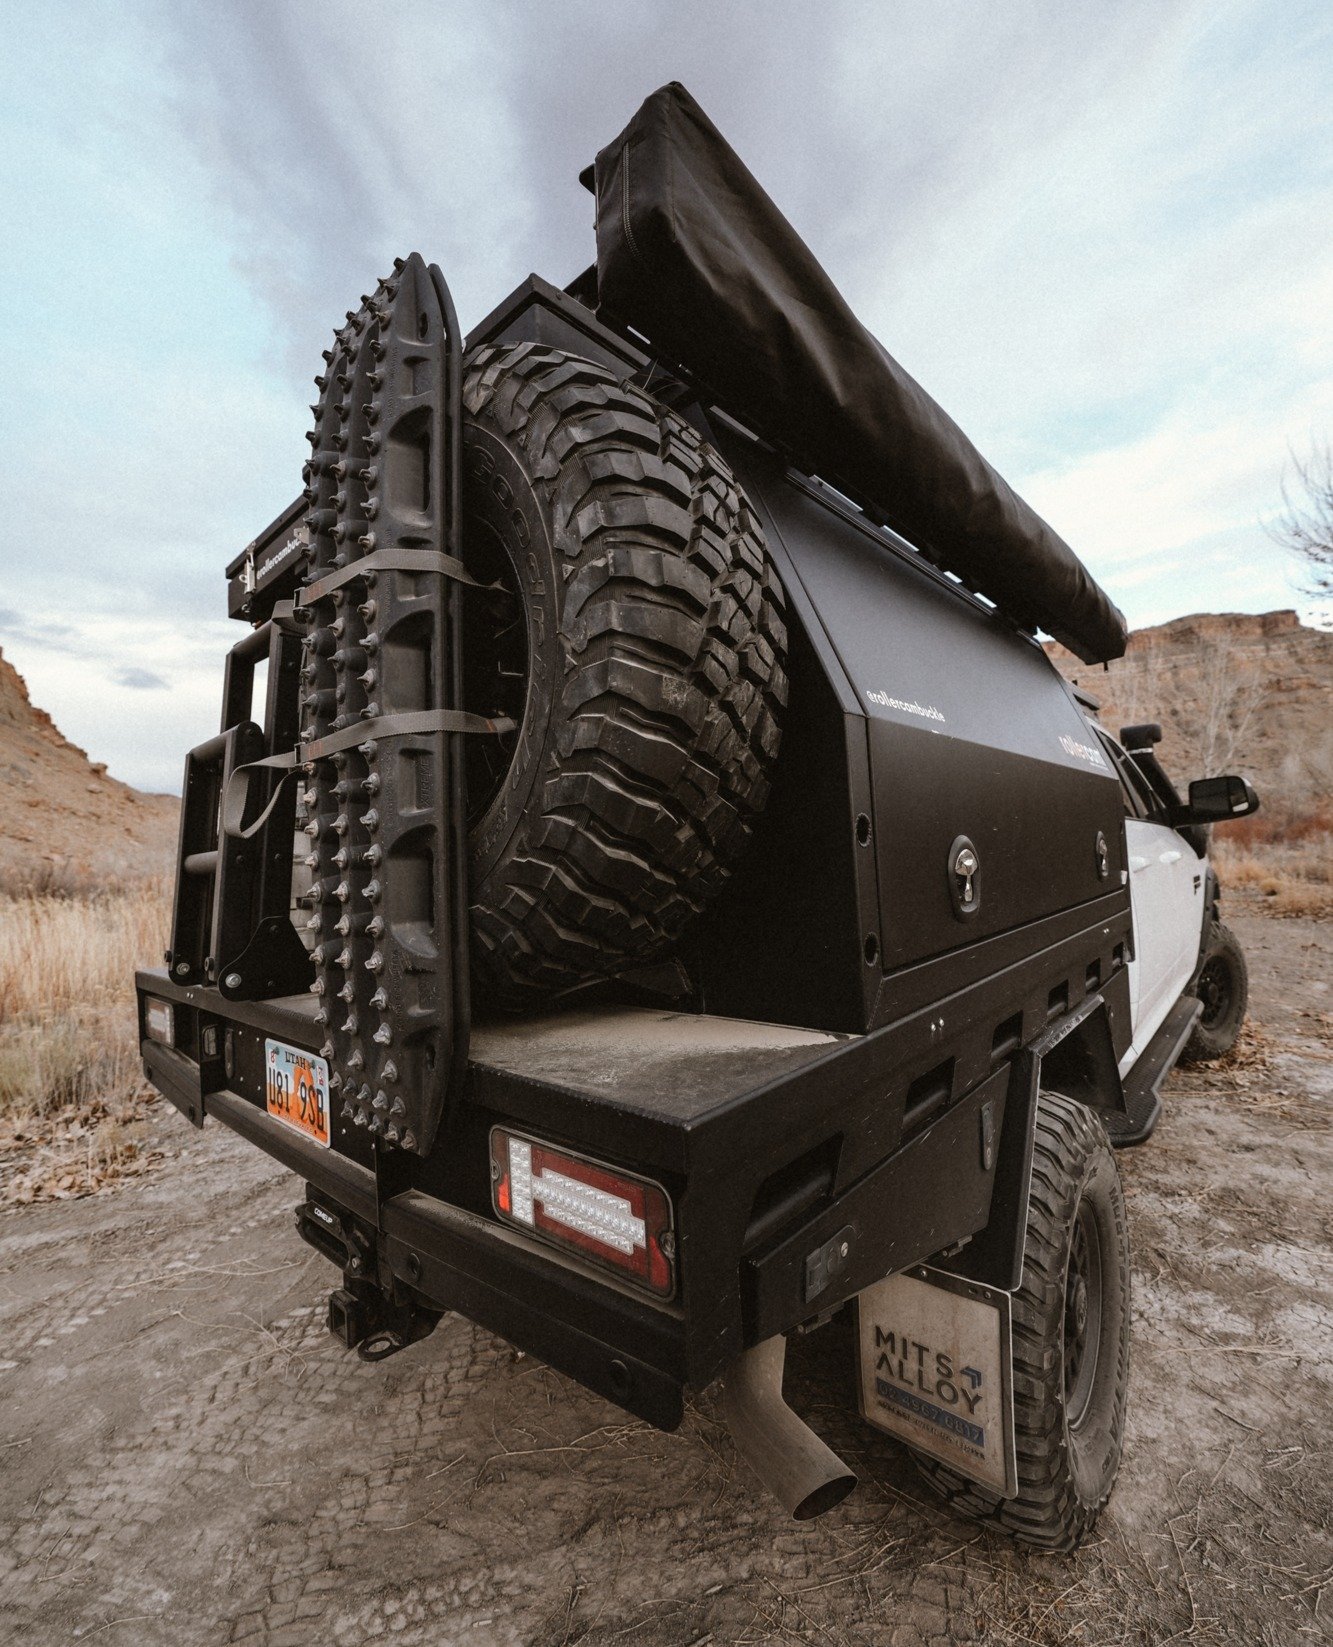 We've got an all-new specialty kit coming out tomorrow 👀⁠
⁠
Any guesses?⁠
⁠
⁠
⁠
⁠
⁠
⁠
&mdash;&mdash;&mdash;&mdash;&mdash;&mdash;&mdash;&mdash;⁠
#overland #offroad #4x4 #adventure #letsgoplaces #utahisrad #myoverlandexpo #lifeelevated #nature #southe